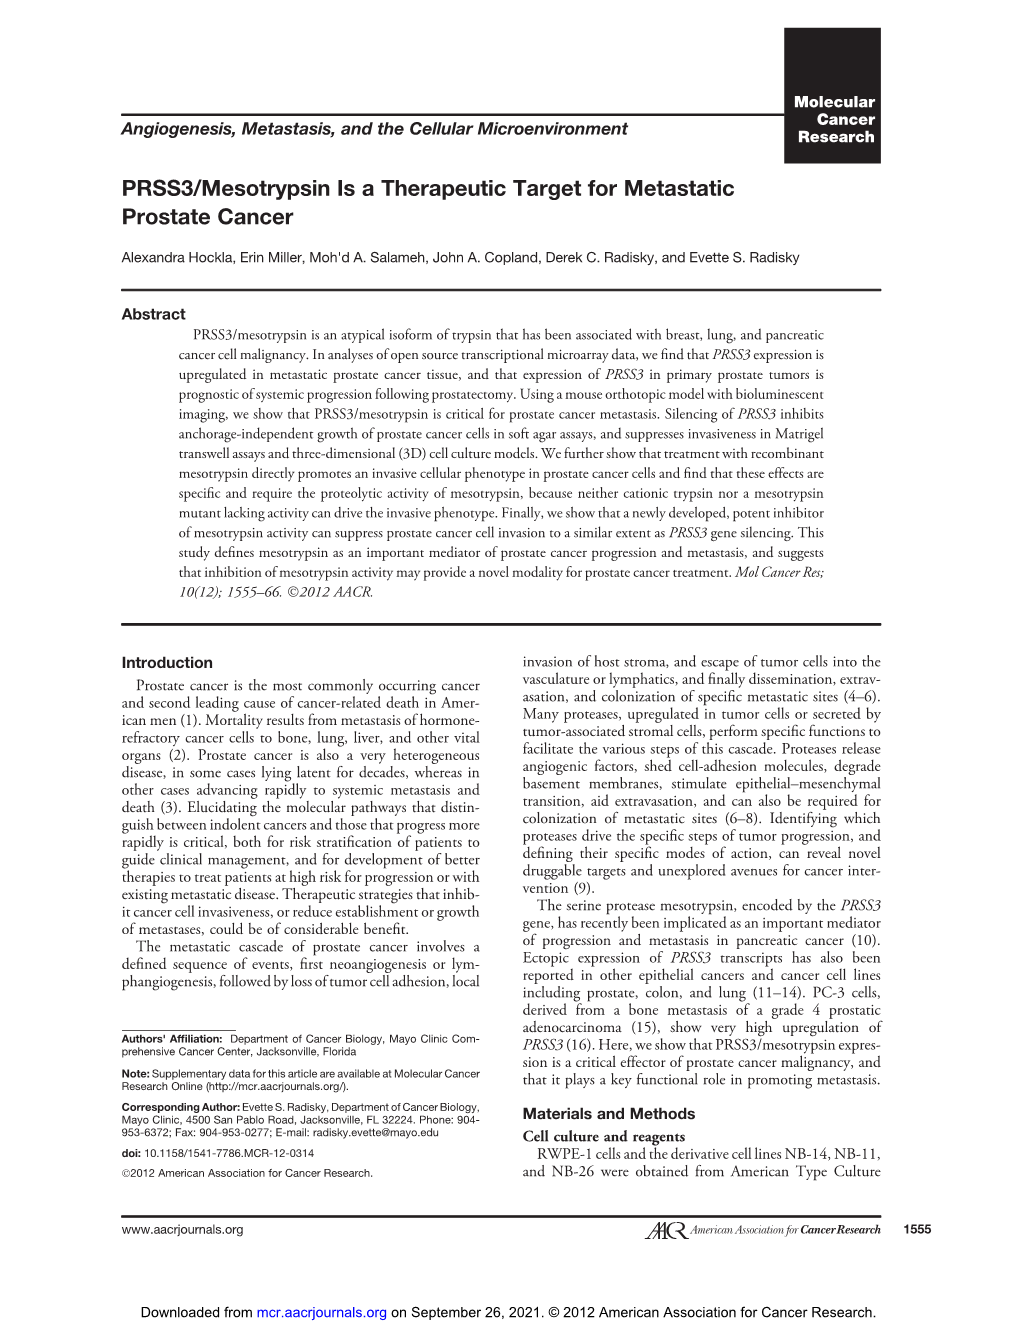 PRSS3/Mesotrypsin Is a Therapeutic Target for Metastatic Prostate Cancer